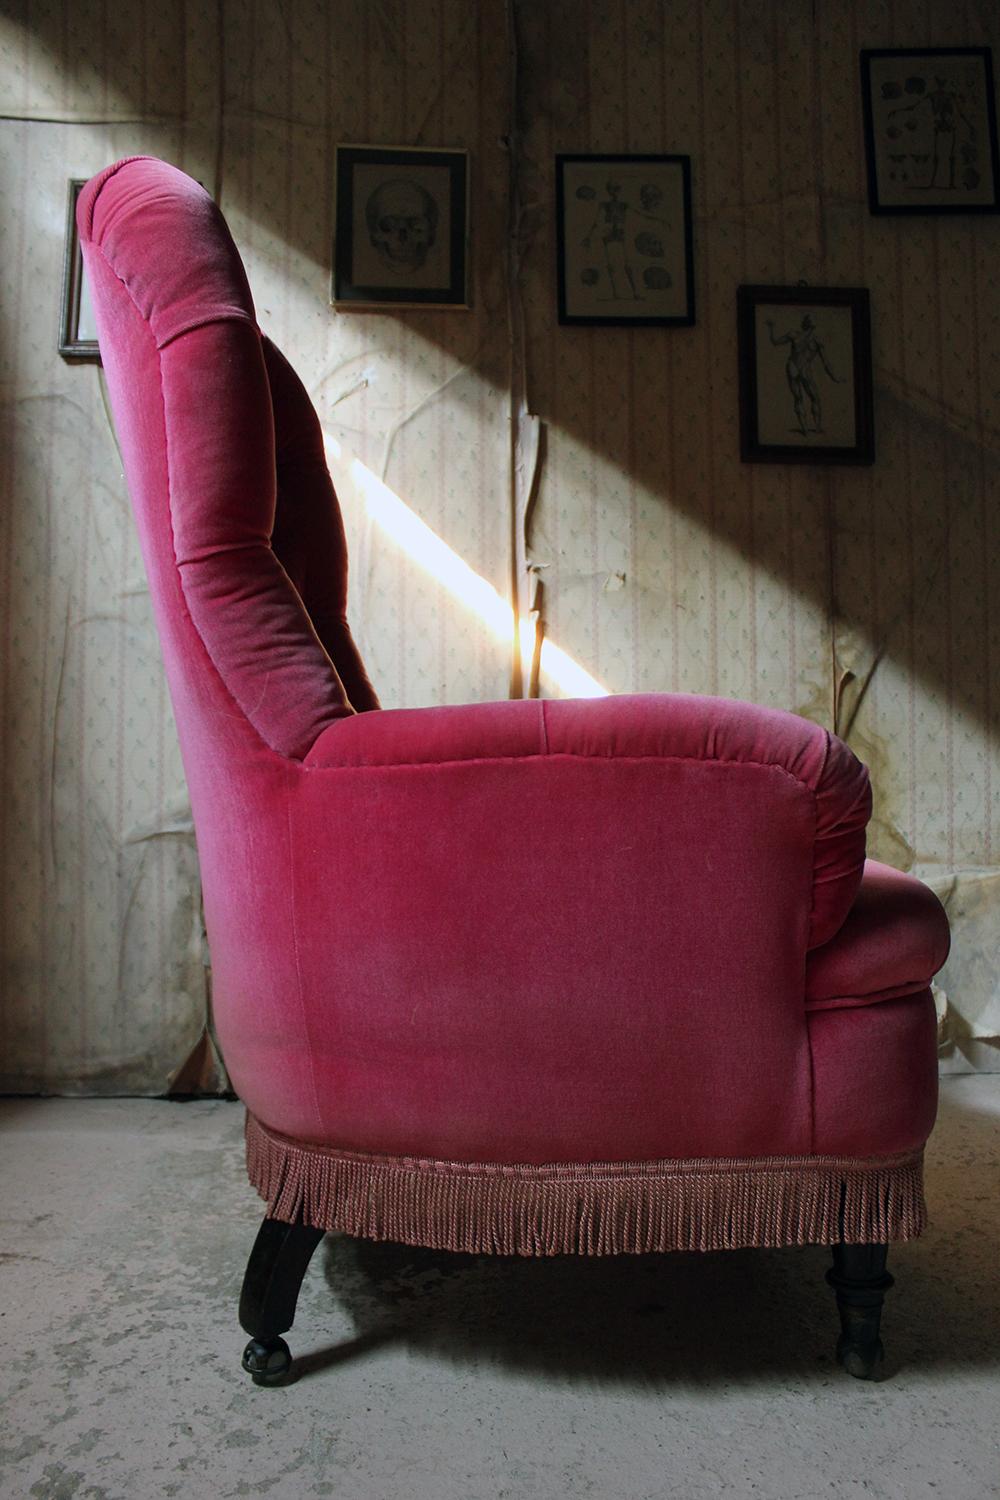 Unusual 19th Century French Pink Upholstered Spoon Back Armchair, circa 1870 9